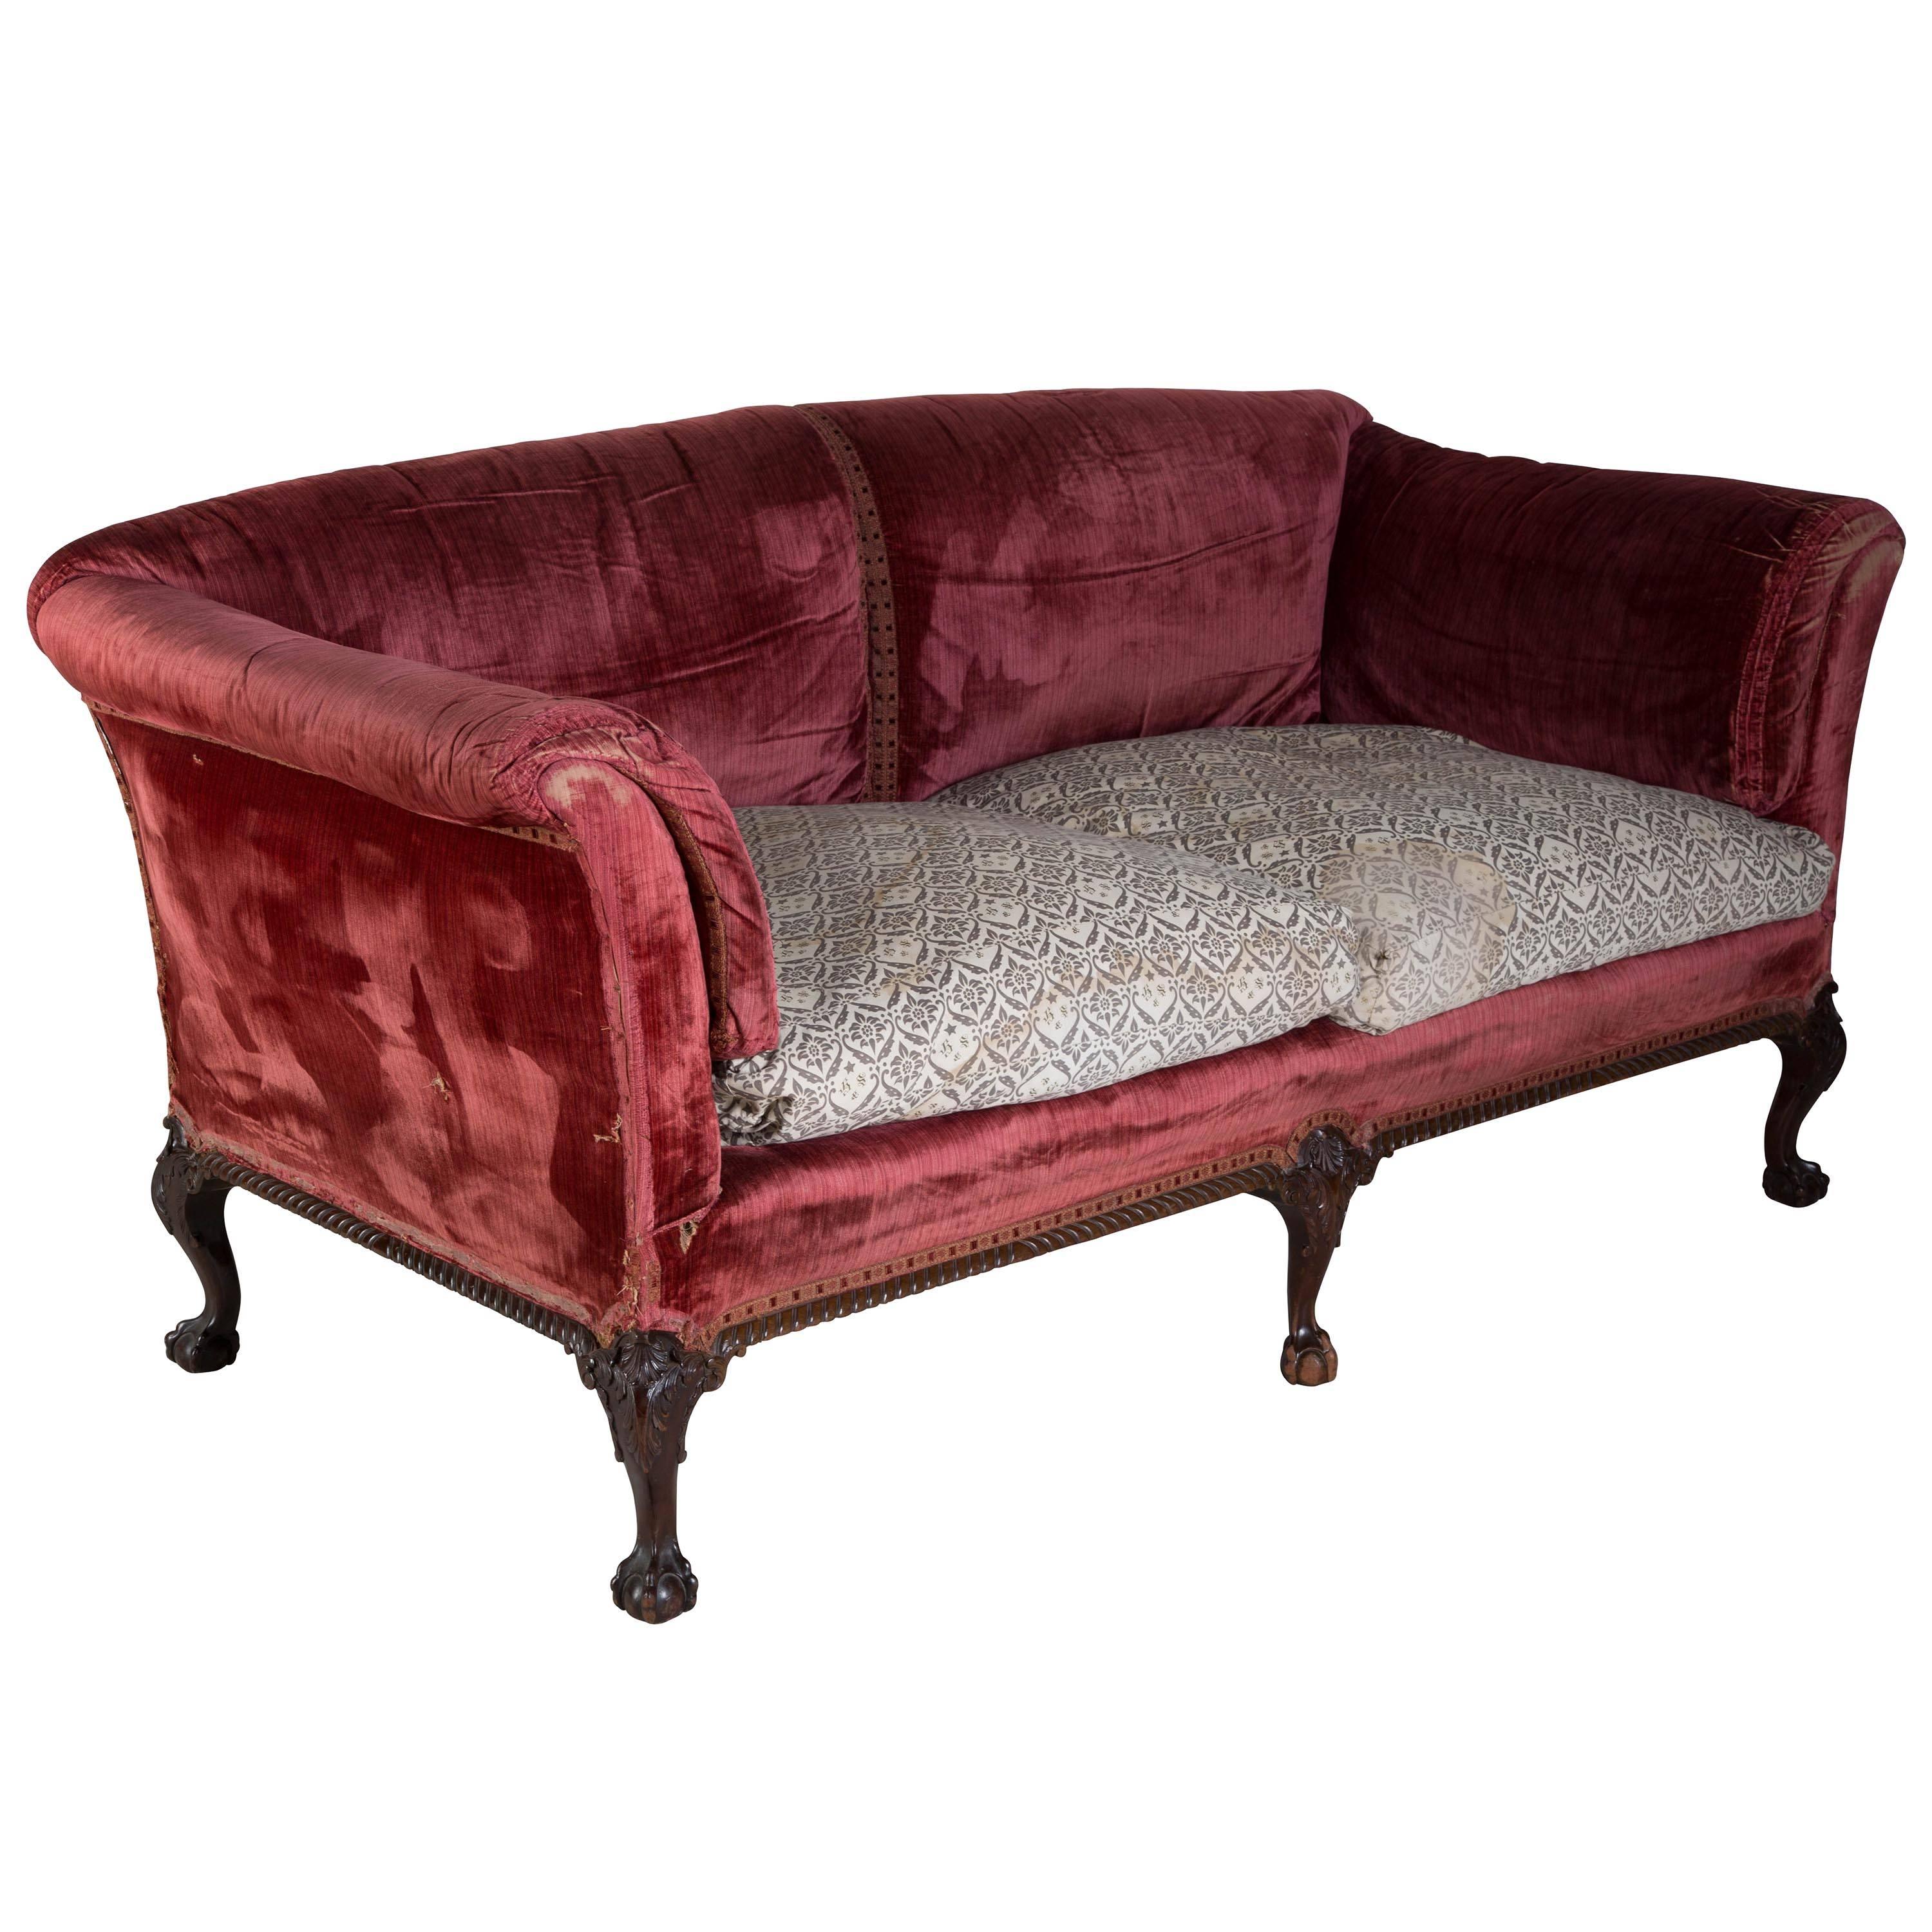 A extremely comfortable large two-seat Howard sofa standing on mahogany ball and claw feet, removed from a Scottish country house. Seat depth 54 cm.